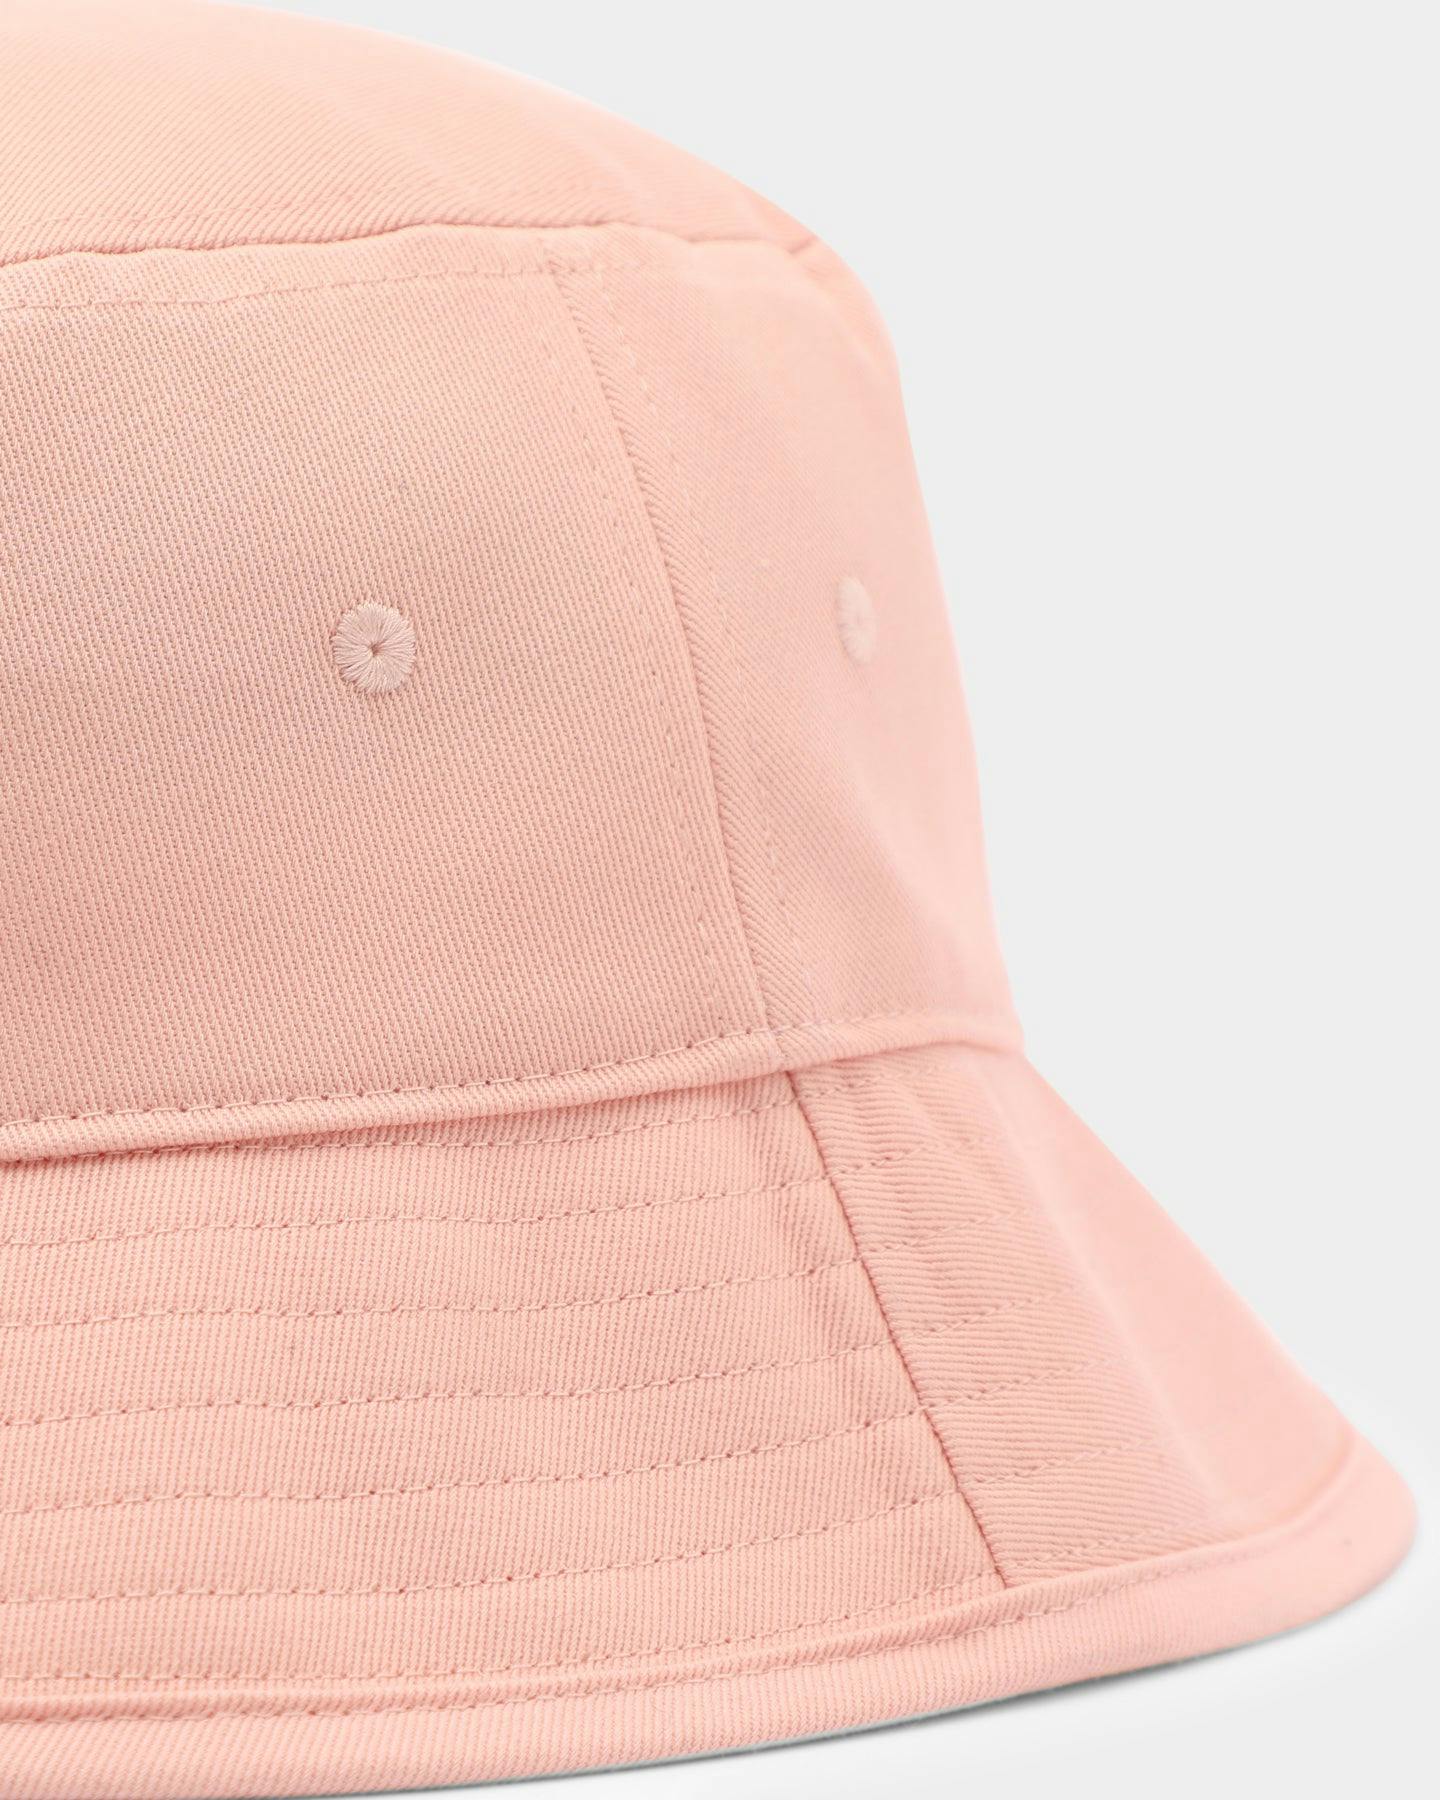 Adidas AC Bucket Hat Crew Vapour Pink/ Whte | Culture Kings